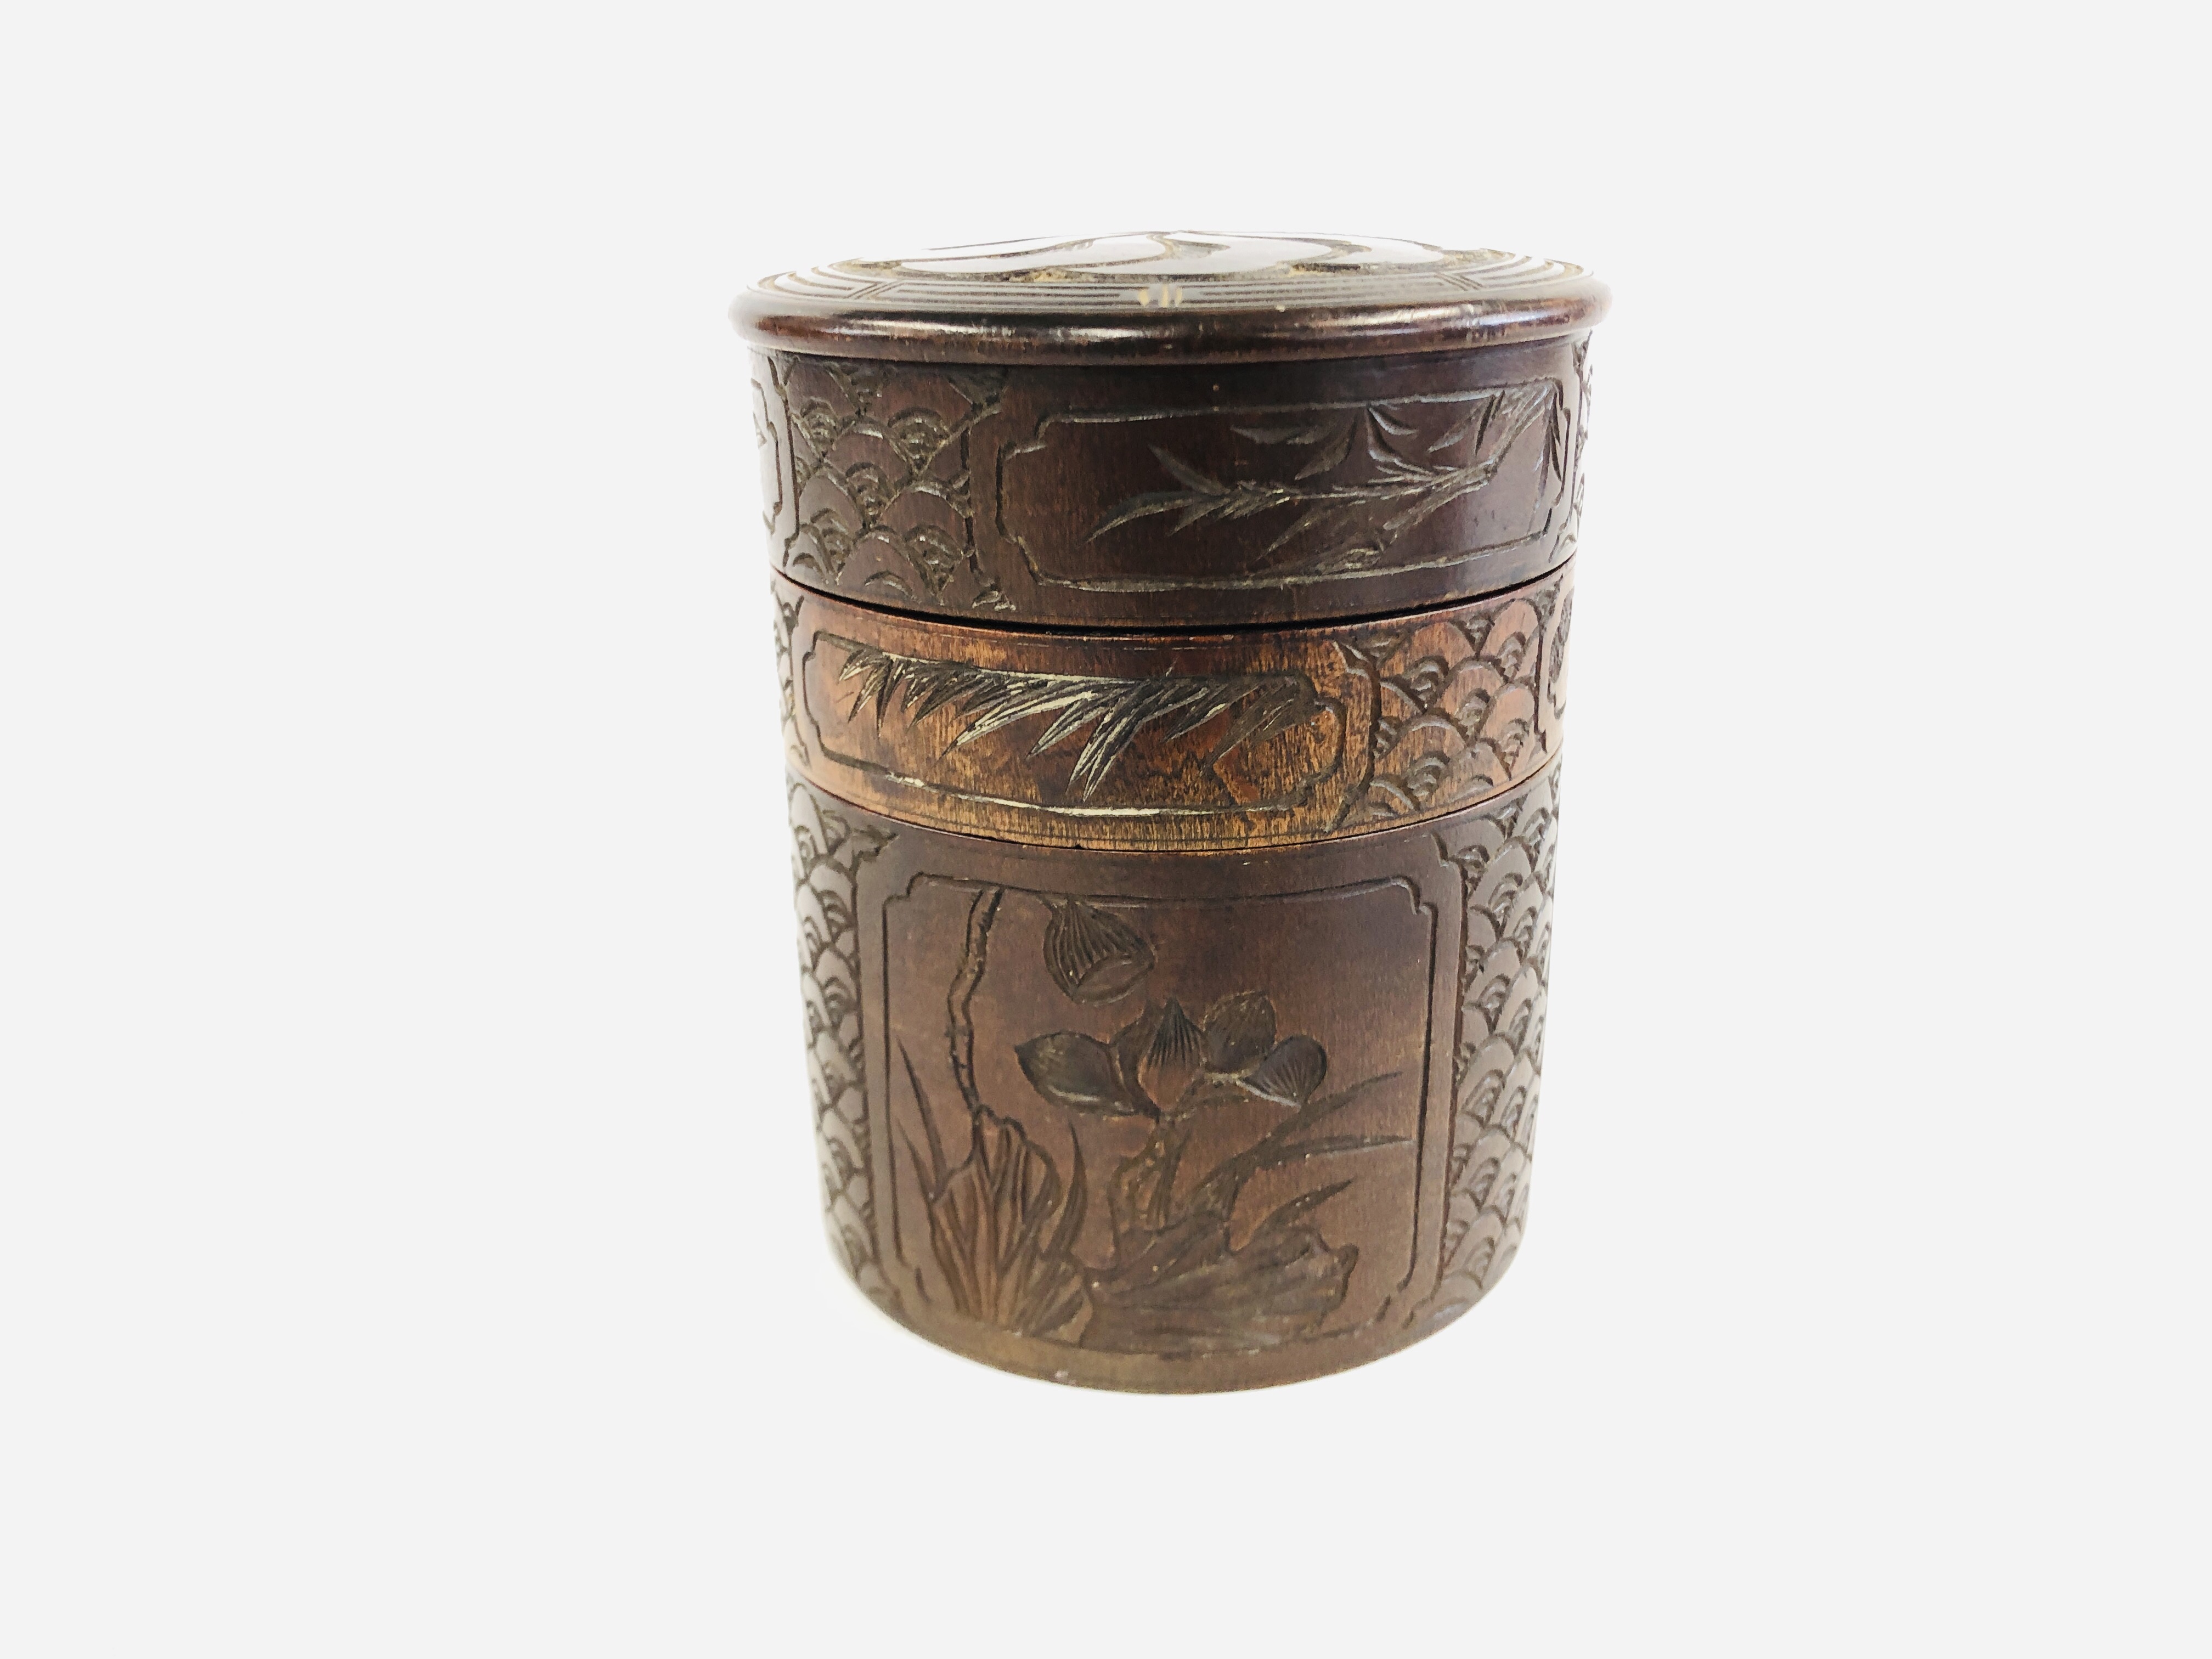 A HAND CARVED CYLINDRICAL DIVISIONAL CONTAINER DECORATED WITH BIRDS AND FOLIAGE - HEIGHT 14CM,